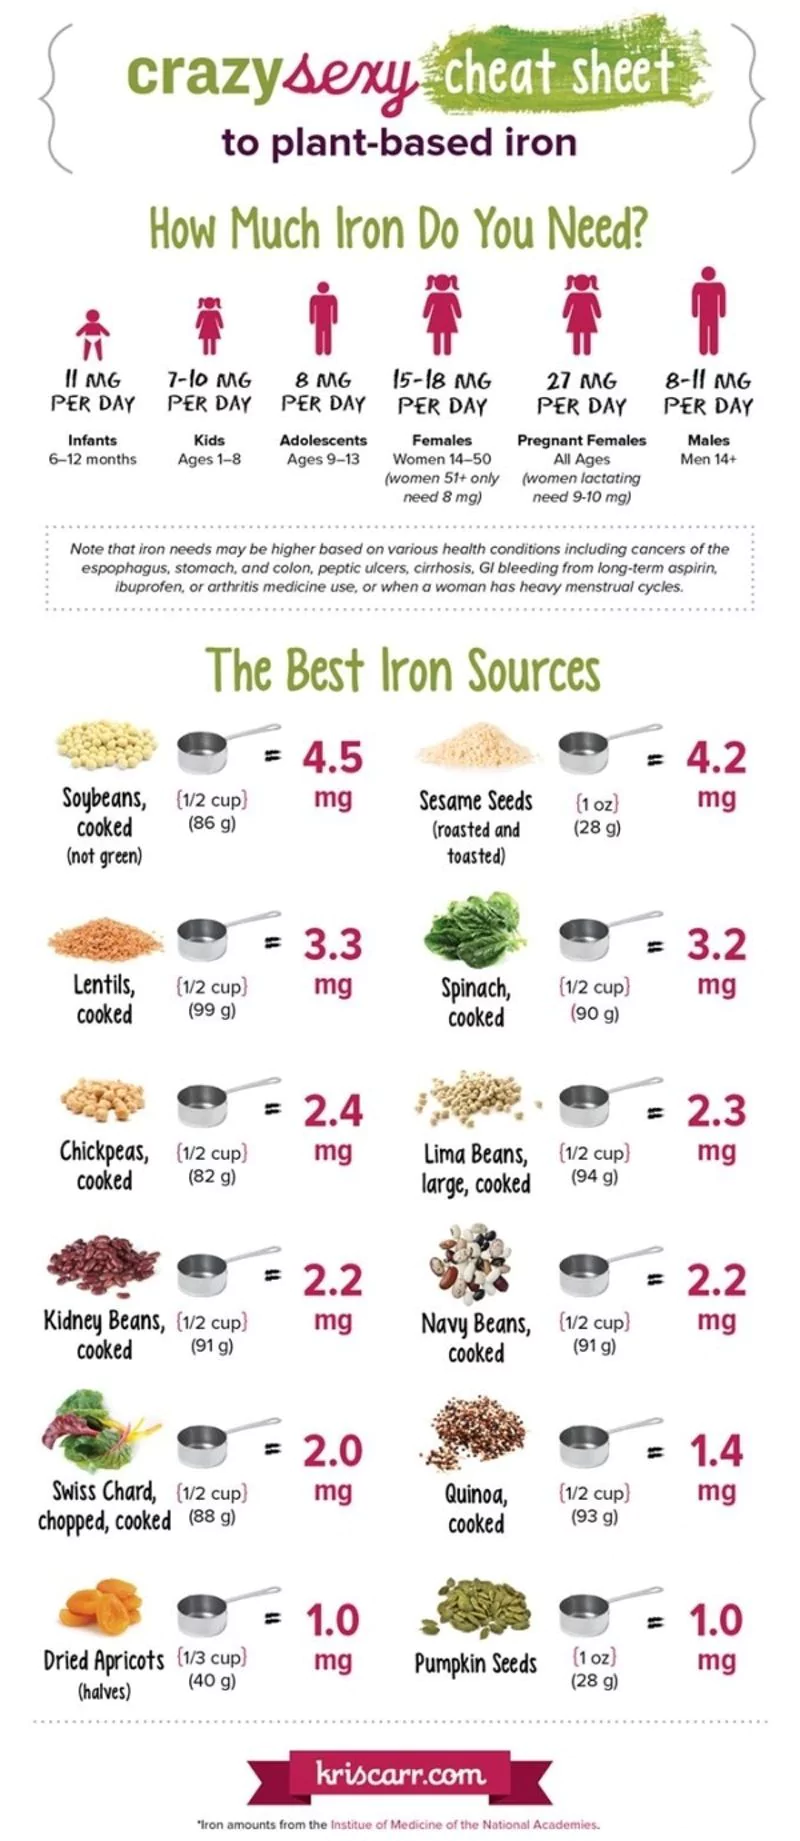 Why Is Iron Important